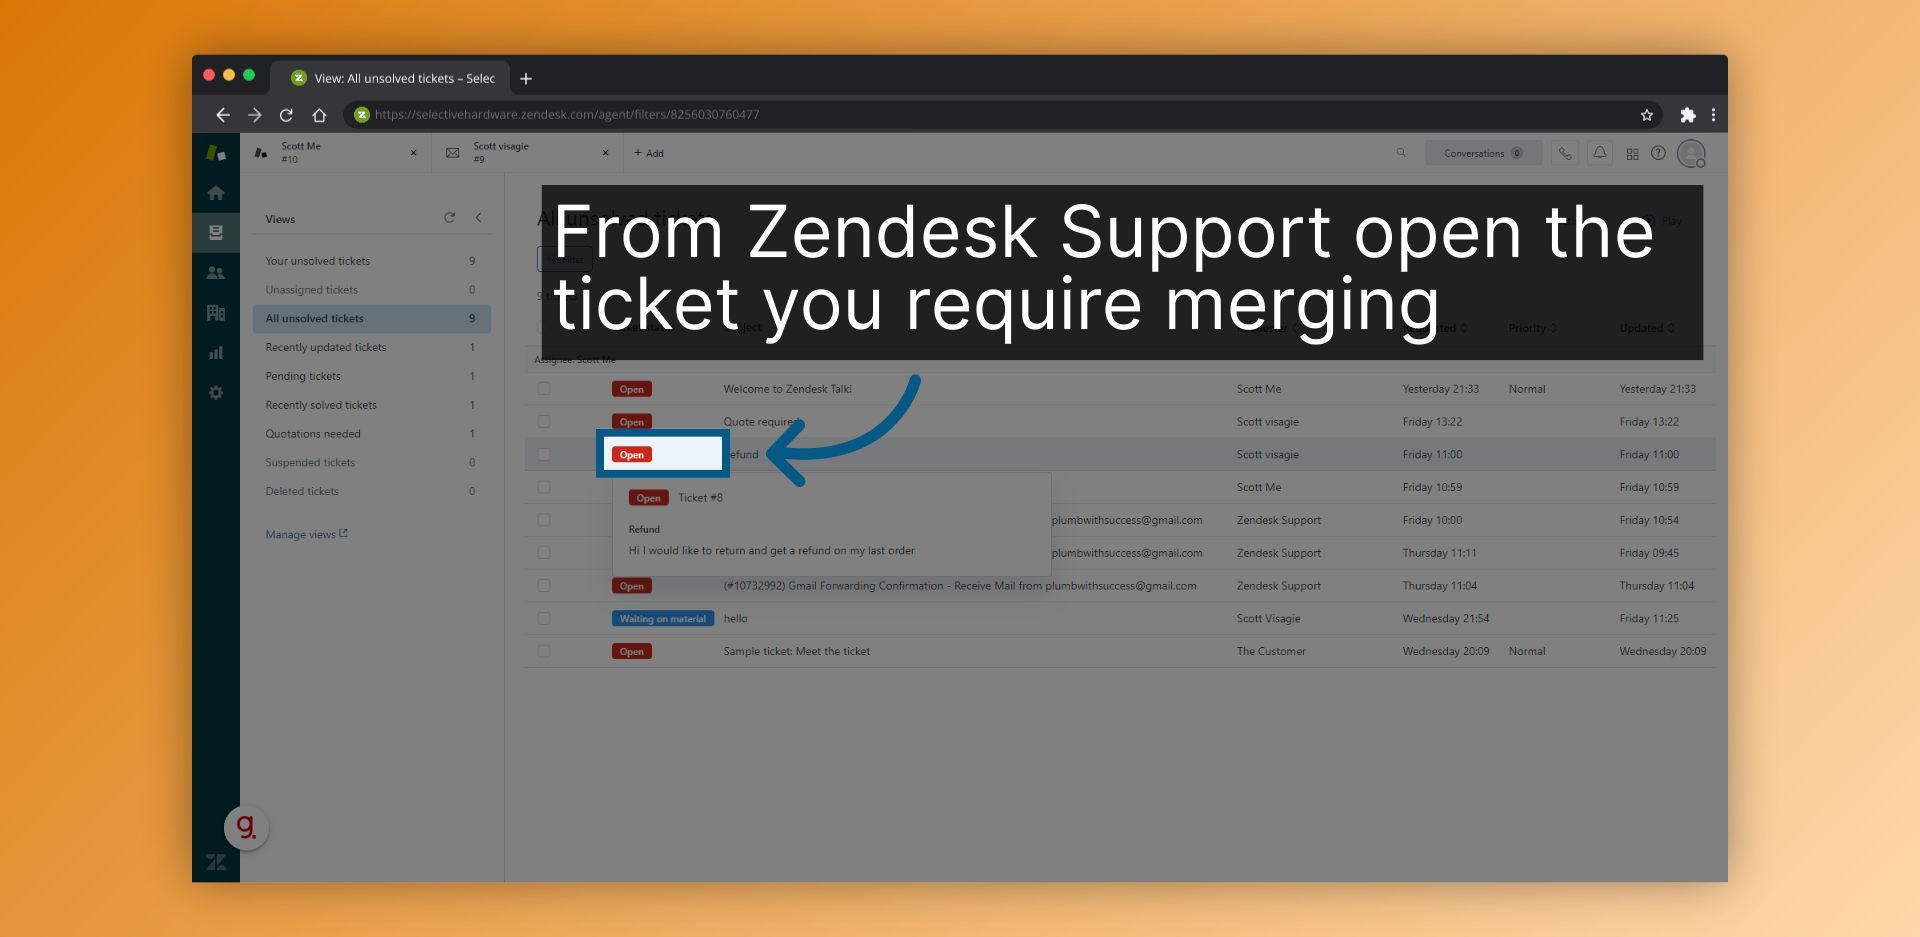 From Zendesk Support open the ticket you require merging